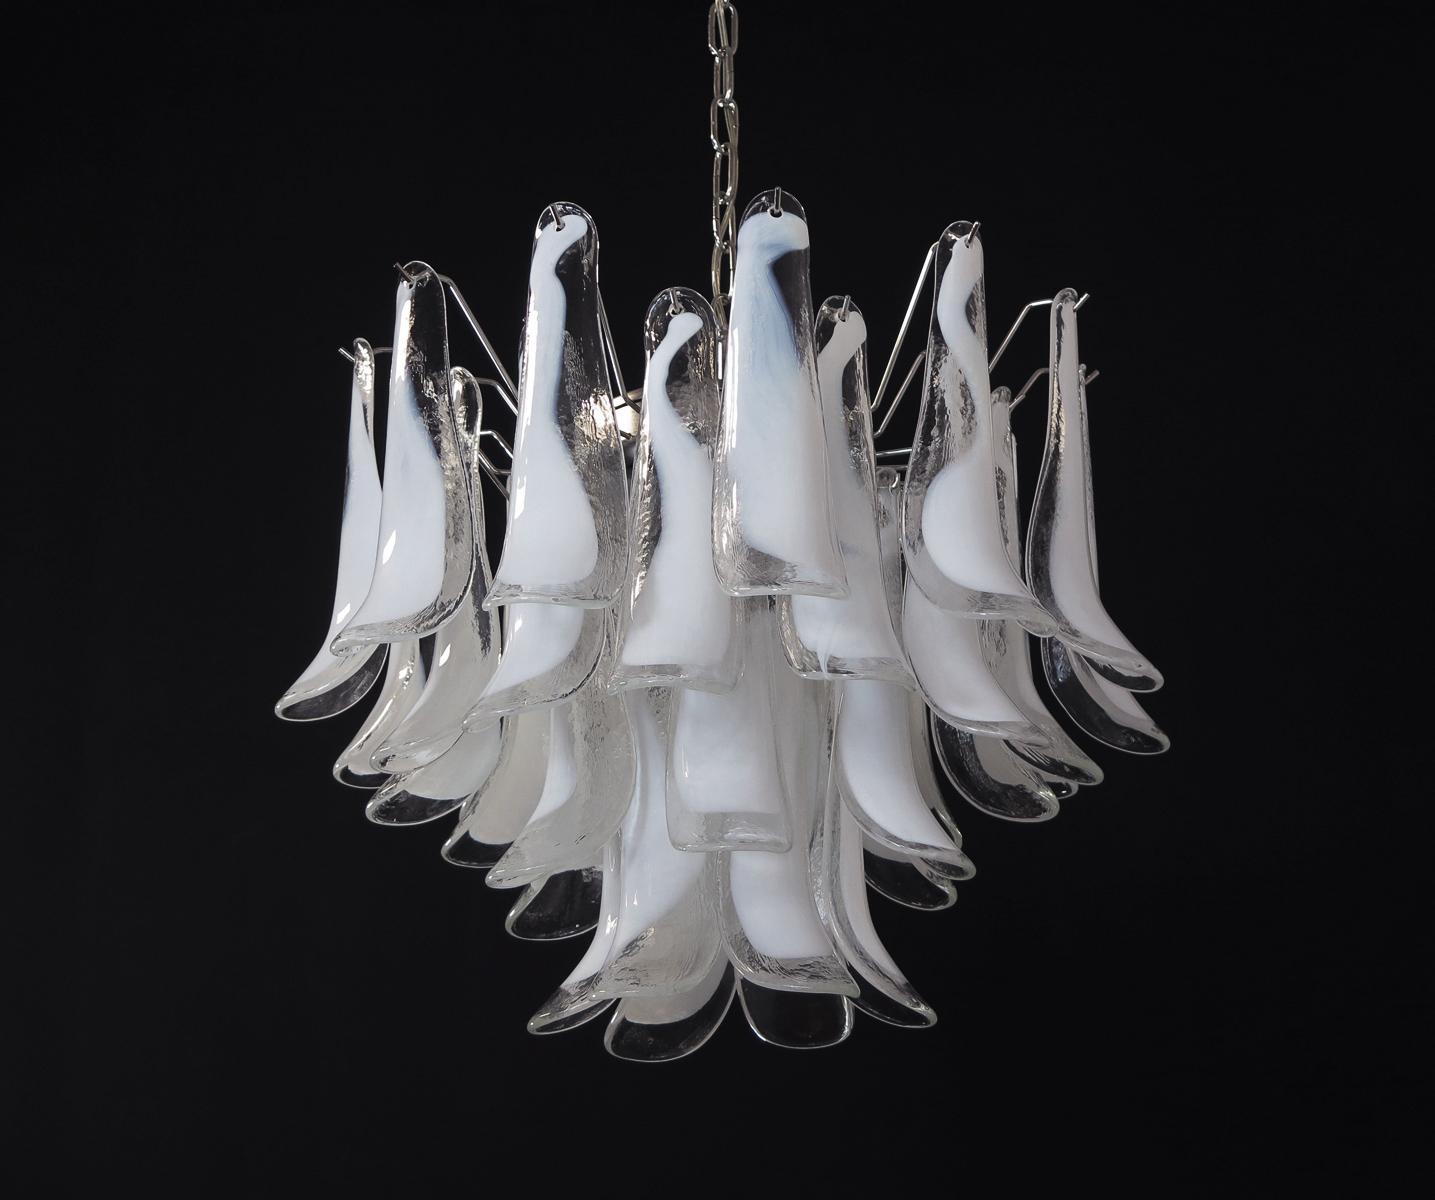 Murano Italian glass chandelier. Fantastic chandelier with white “lattimo” glasses, nickel-plated metal frame. It has 36 big monumental petals glass. The glasses are very high quality, the photos do not do the beauty, luster of these